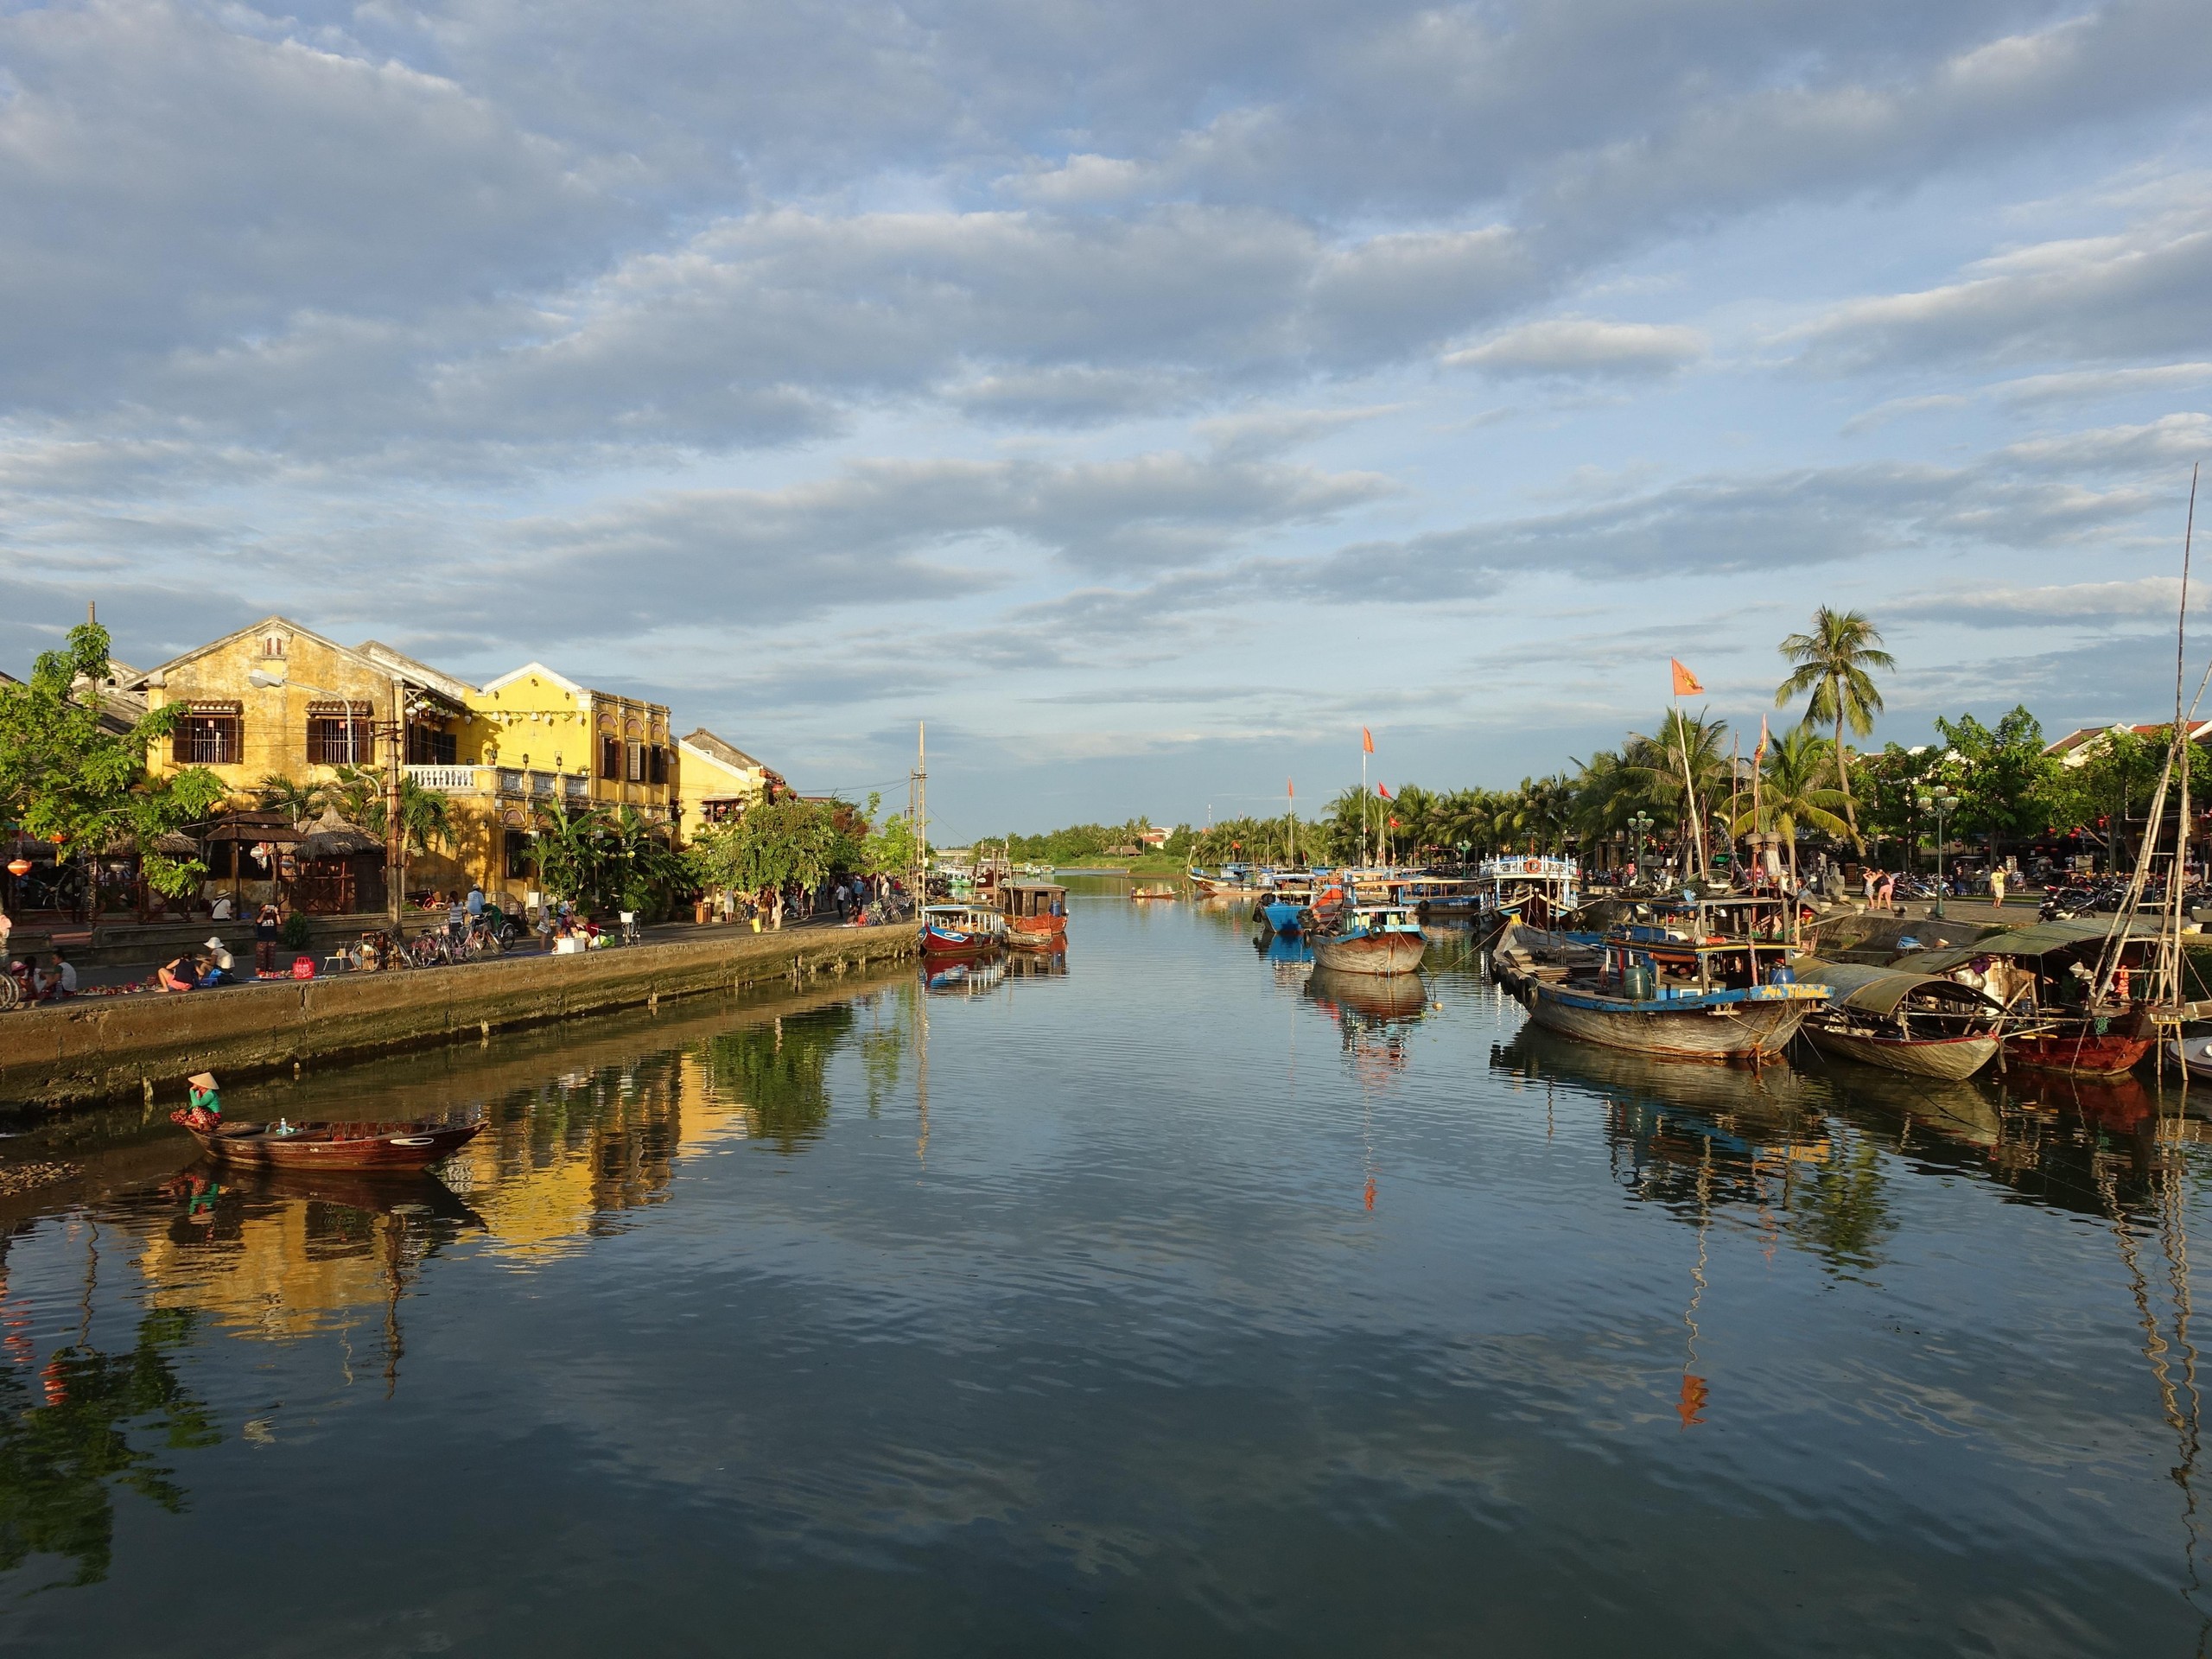 Hoi An, one of the most picturesque cities of Vietnam